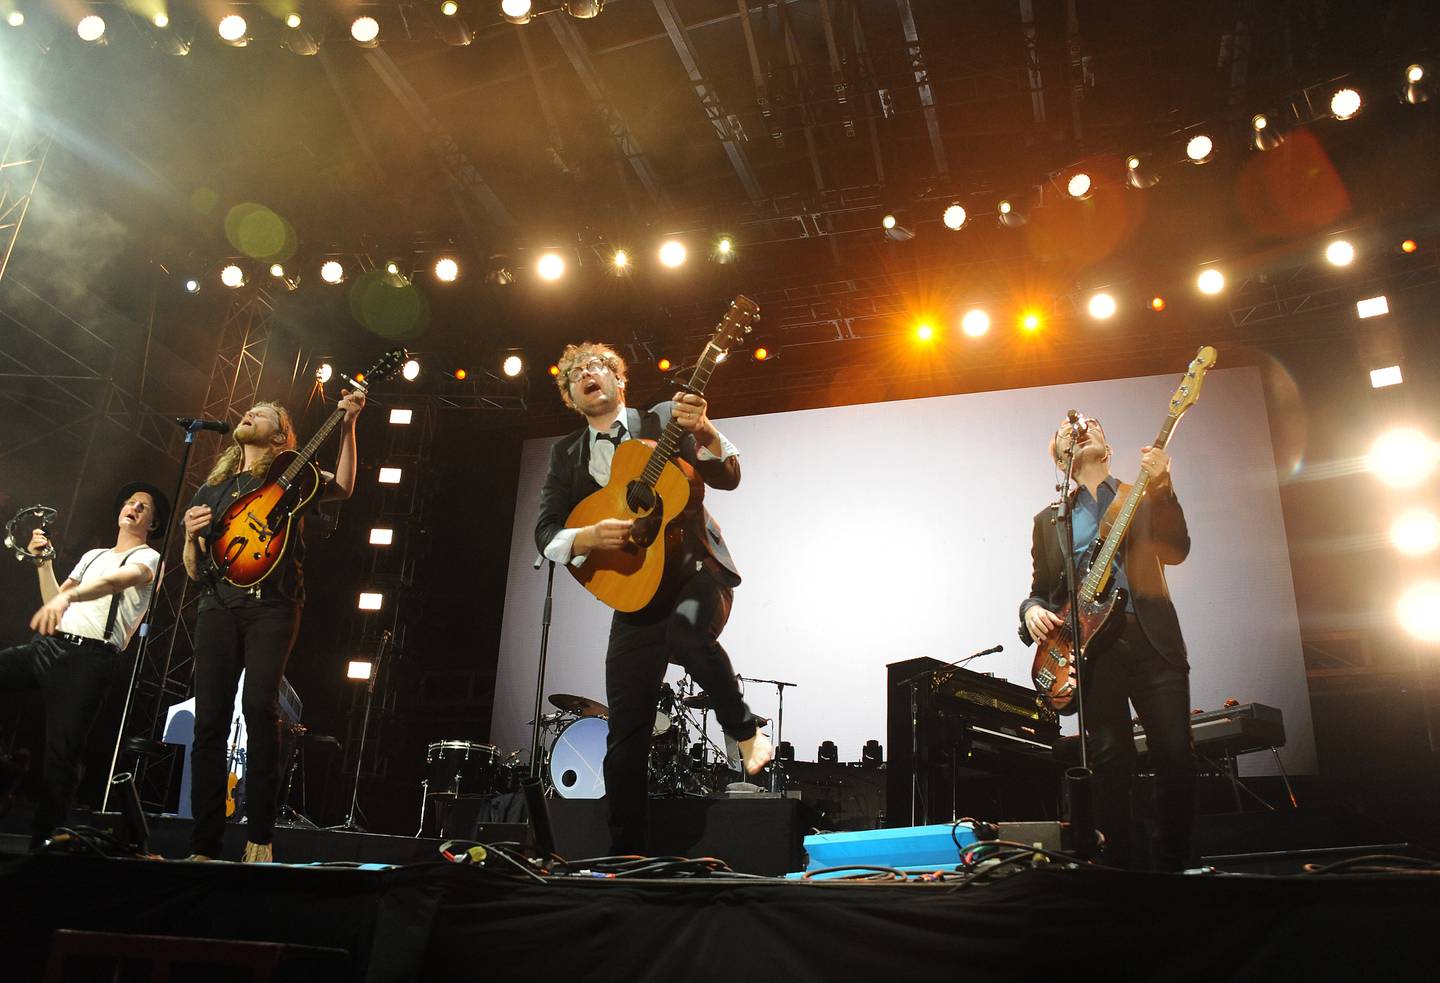 FORT LAUDERDALE, FLORIDA - DECEMBER 04: Jeremiah Fraites, Wesley Schultz, Stelth Ulvang and Ben Wahamaki of The Lumineers perform on stage during Audacy Beach Festival at Fort Lauderdale Beach Park on December 04, 2021 in Fort Lauderdale, Florida. (Photo by Desiree Navarro/Getty Images)